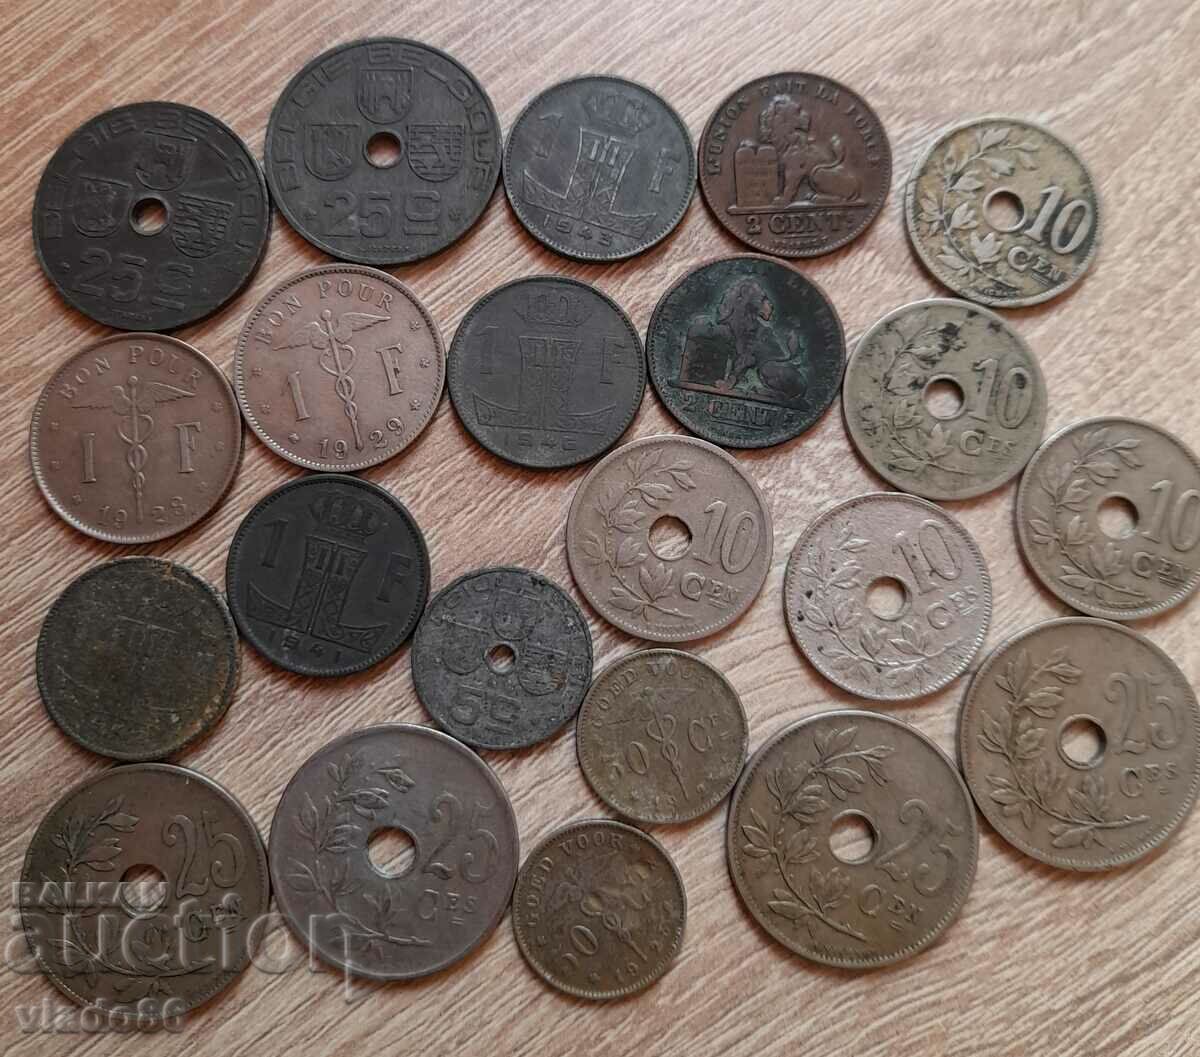 Lot of old Belgian non-recurring coins